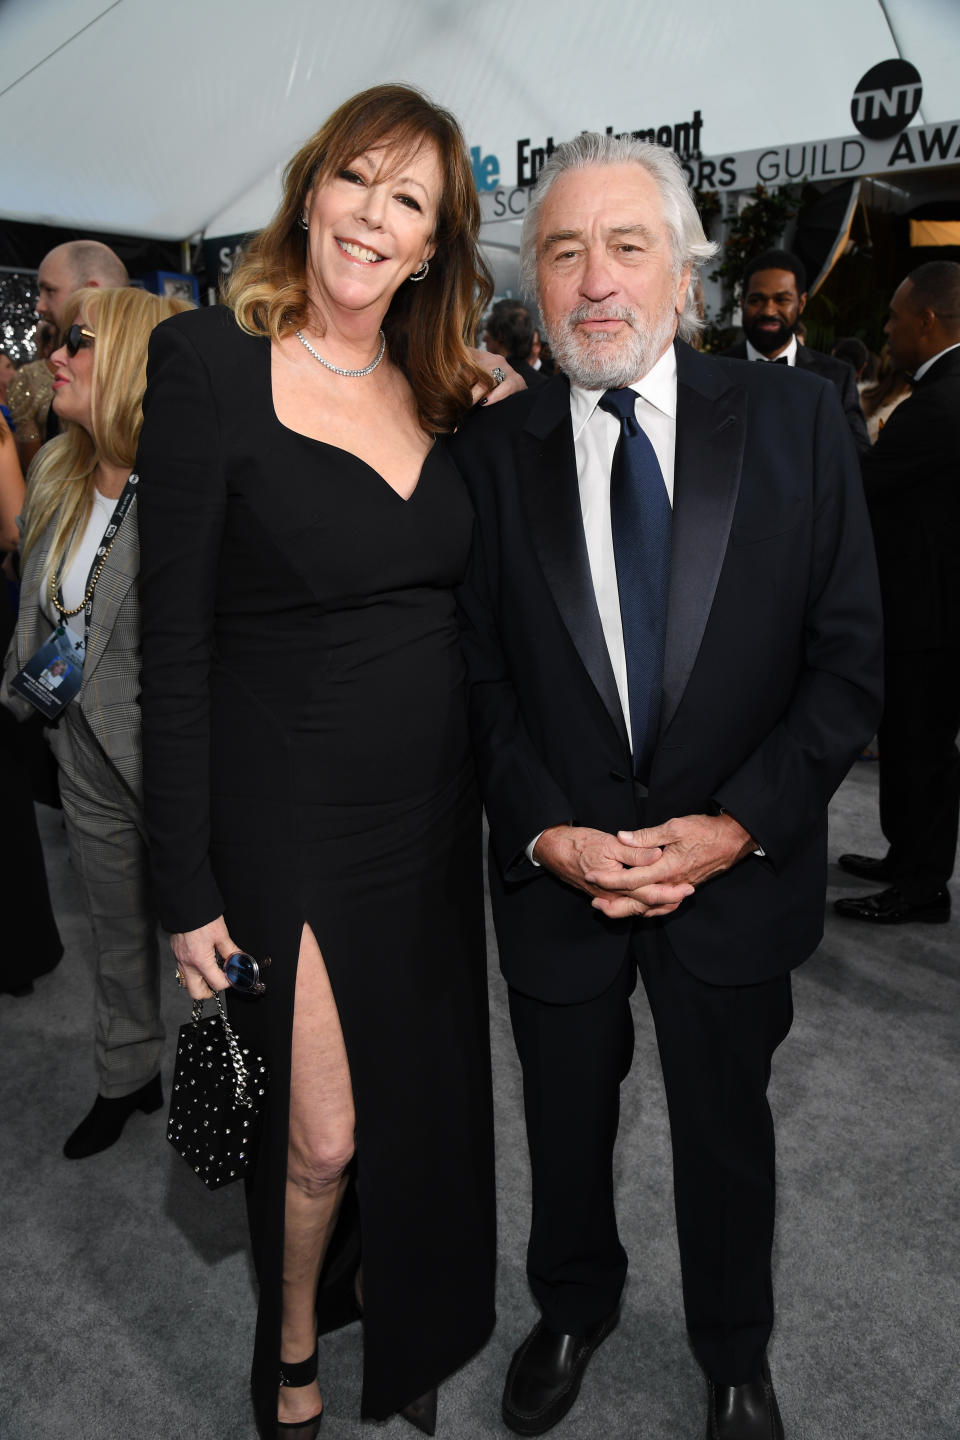 LOS ANGELES, CALIFORNIA - JANUARY 19: (L-R) Jane Rosenthal and Robert De Niro attend the 26th Annual Screen Actors Guild Awards at The Shrine Auditorium on January 19, 2020 in Los Angeles, California. 721336 (Photo by Kevin Mazur/Getty Images for Turner)